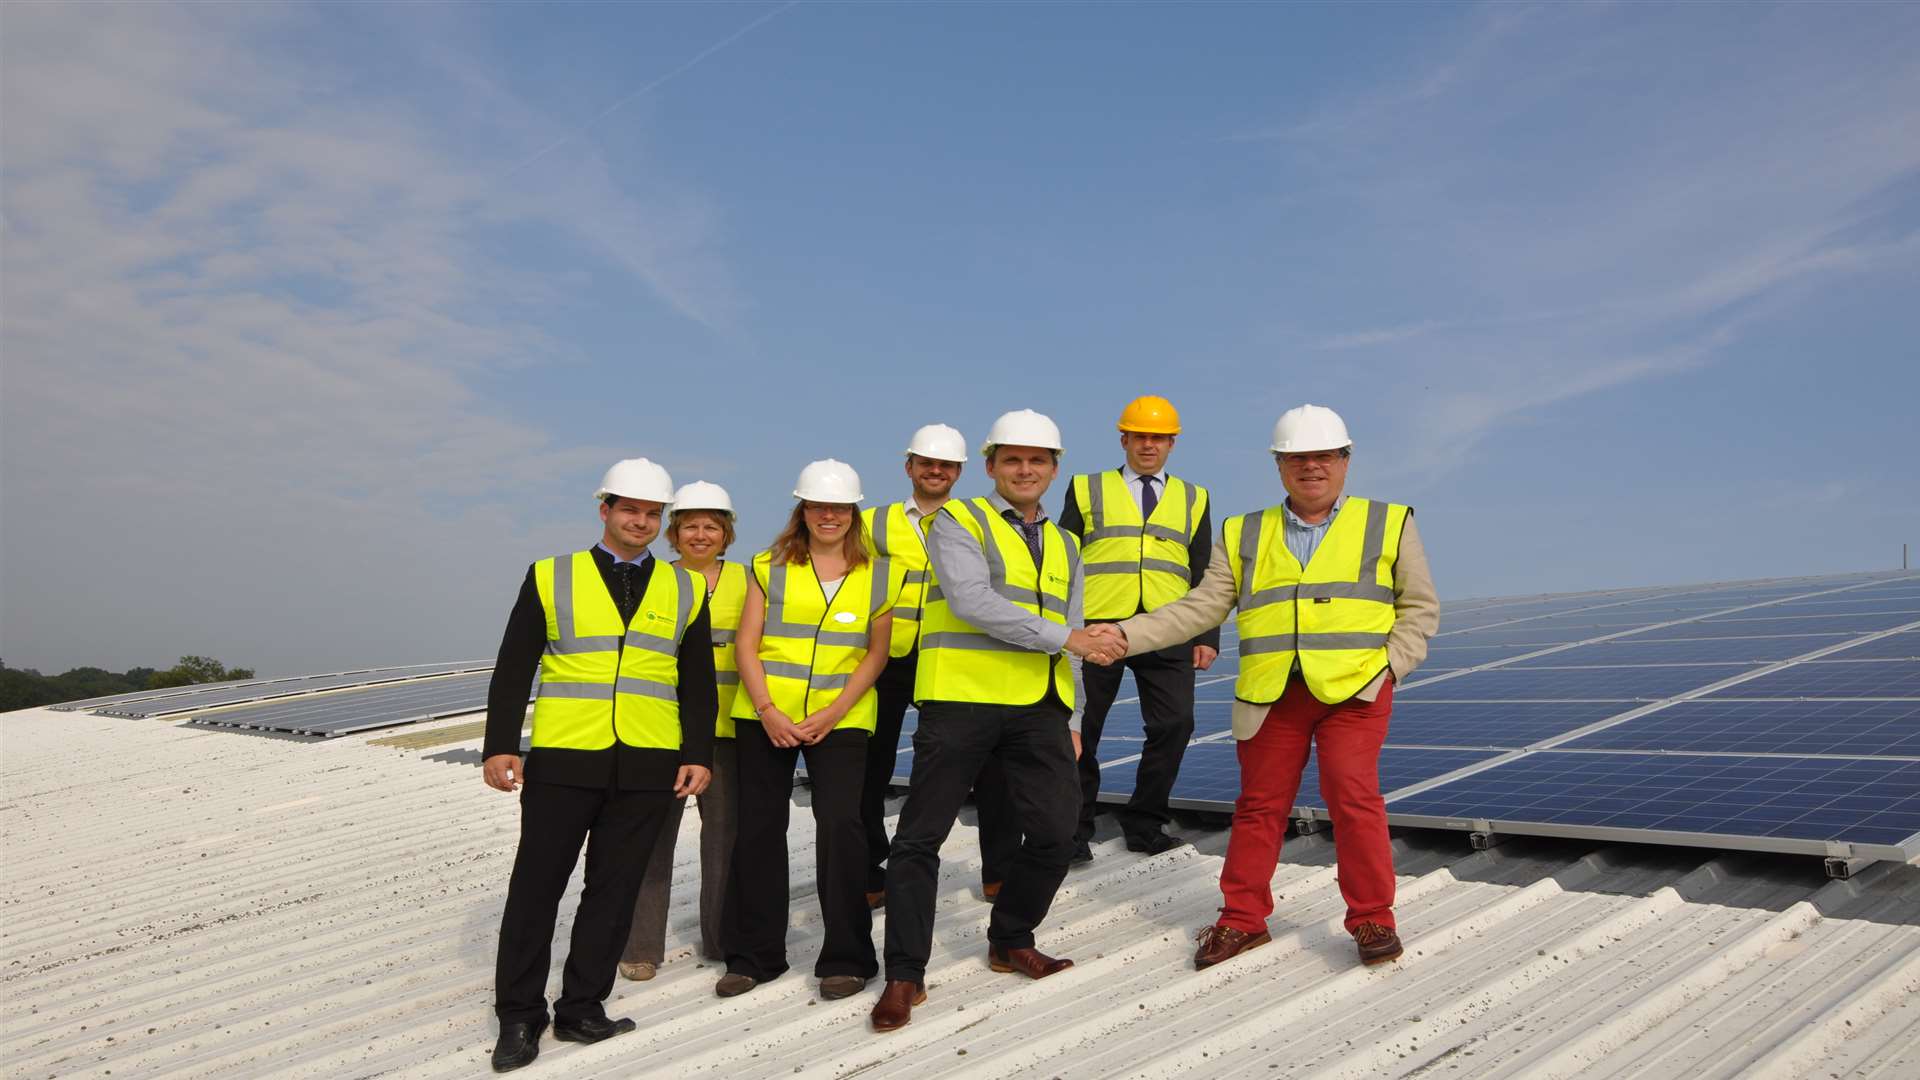 Representatives from TWBC, Ecosphere Renewables and Fusion Lifestyle on the tennis centre roof with the solar panels